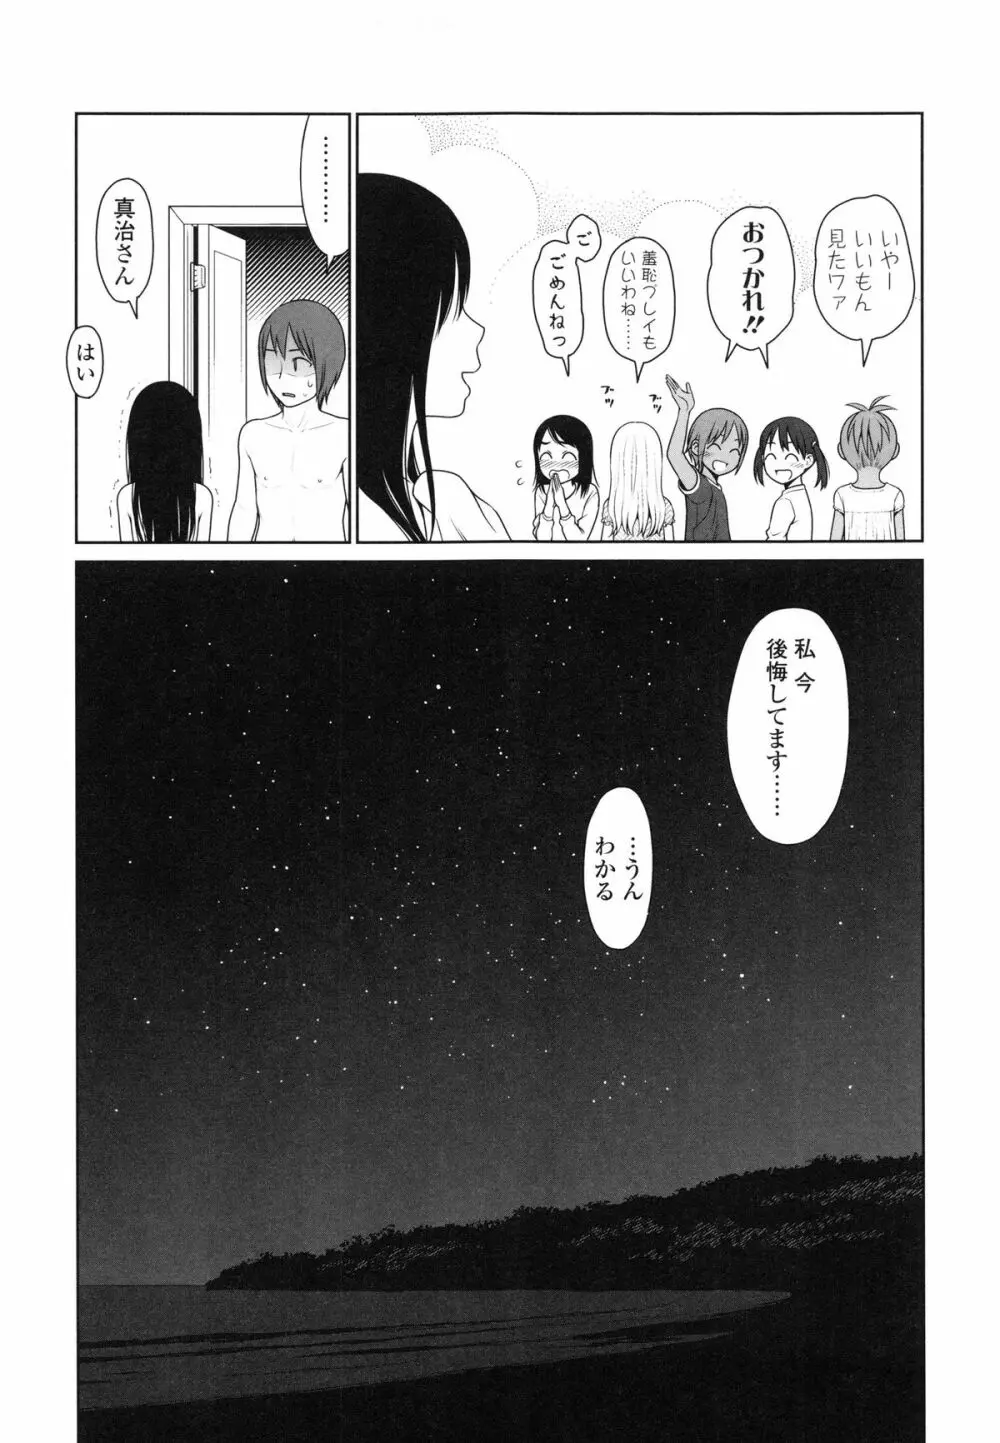 Japanese Preteen Suite Page.223